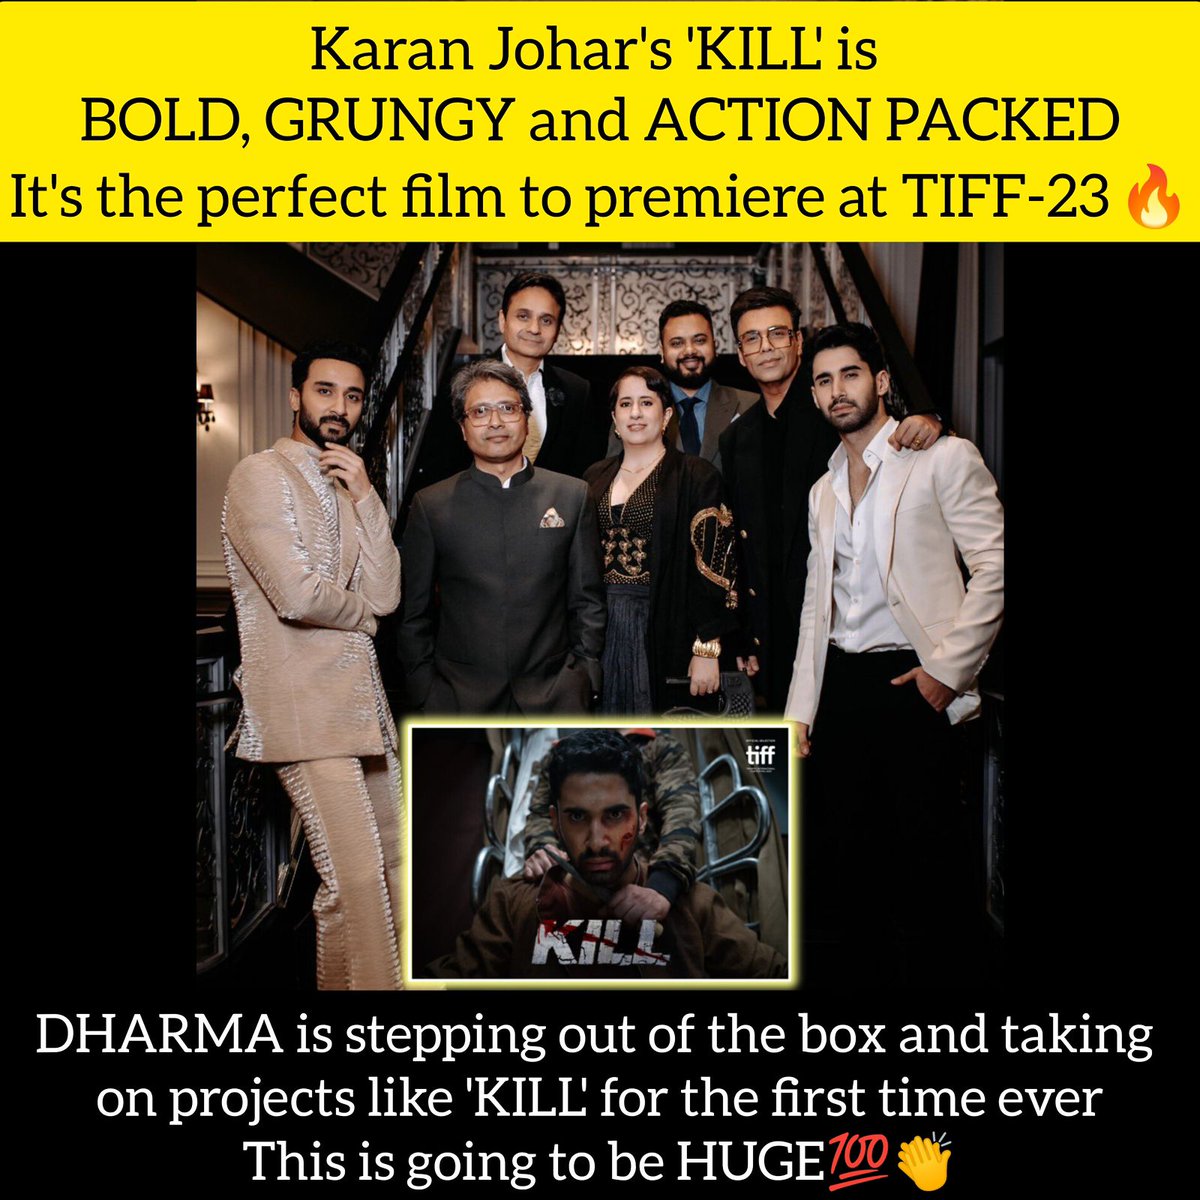 #KaranJohar and #GuneetMonga have promised an unparalleled Bollywood experience – intense acting and chilling gore! Can’t wait to see #Lakshya make his debut in #Kill 😍